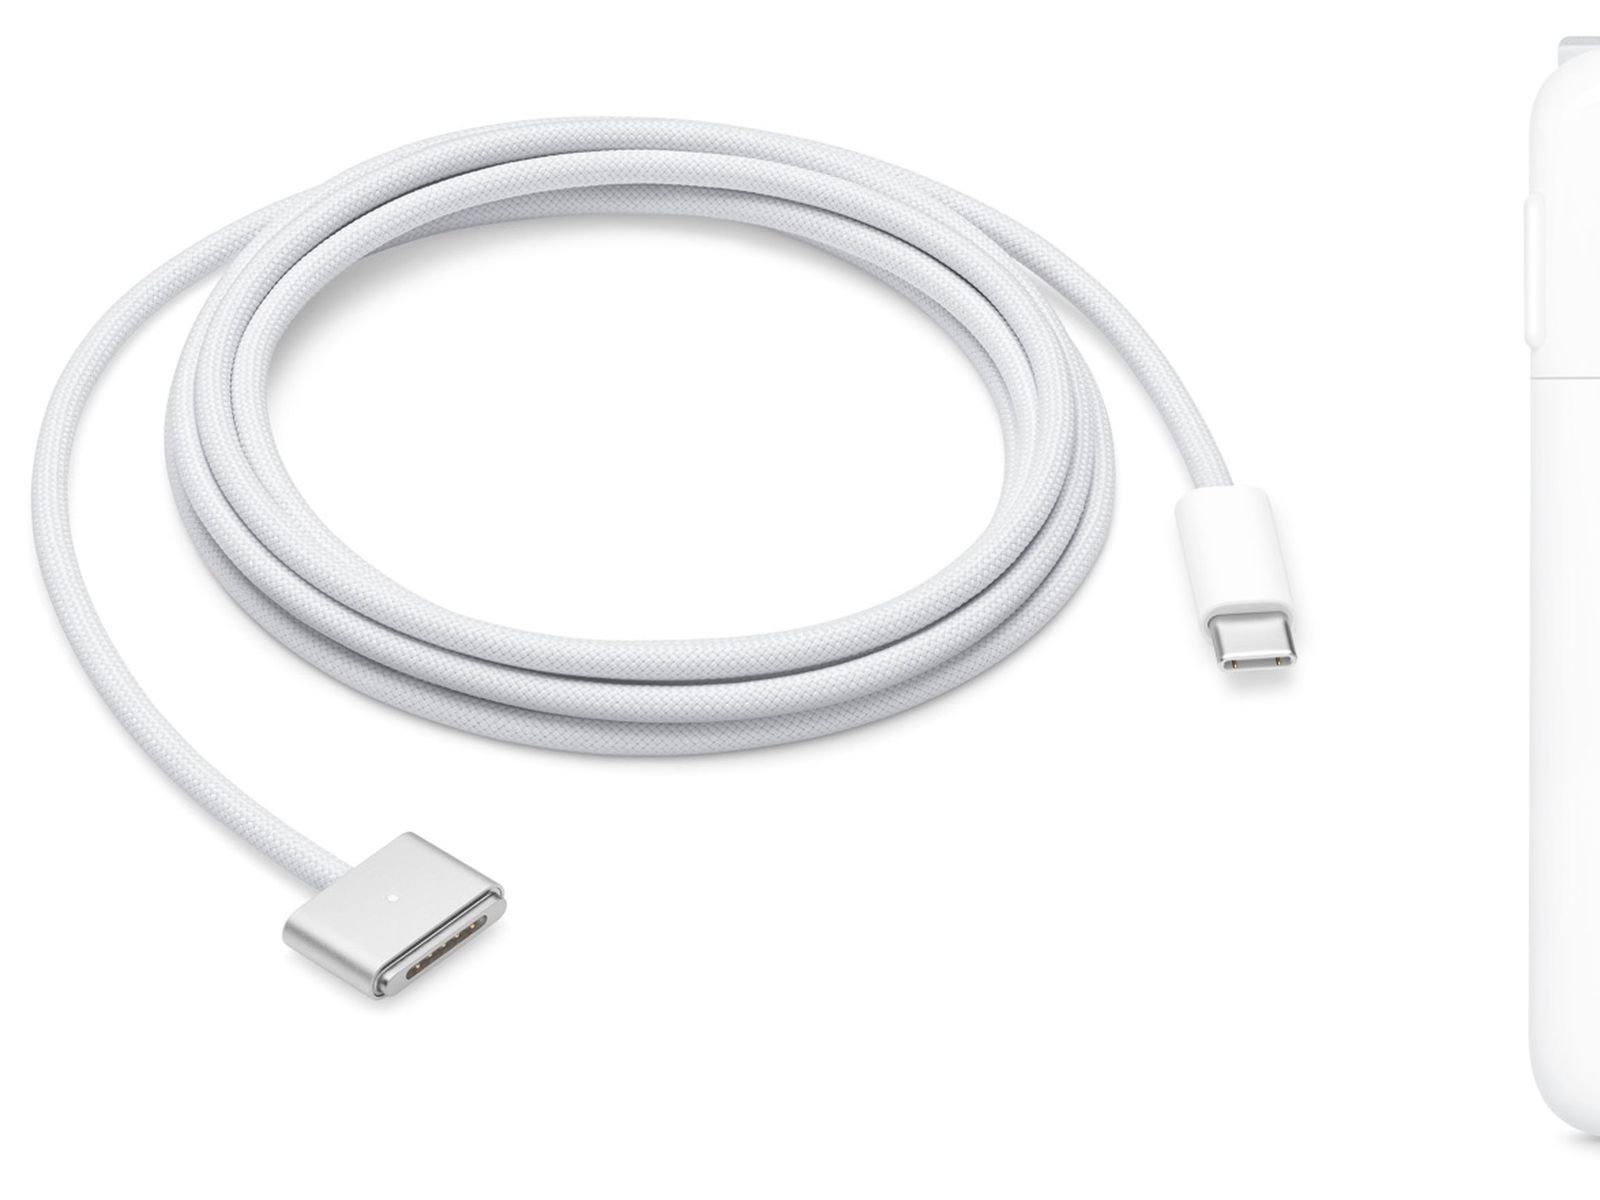 macbook pro cable to transfer data